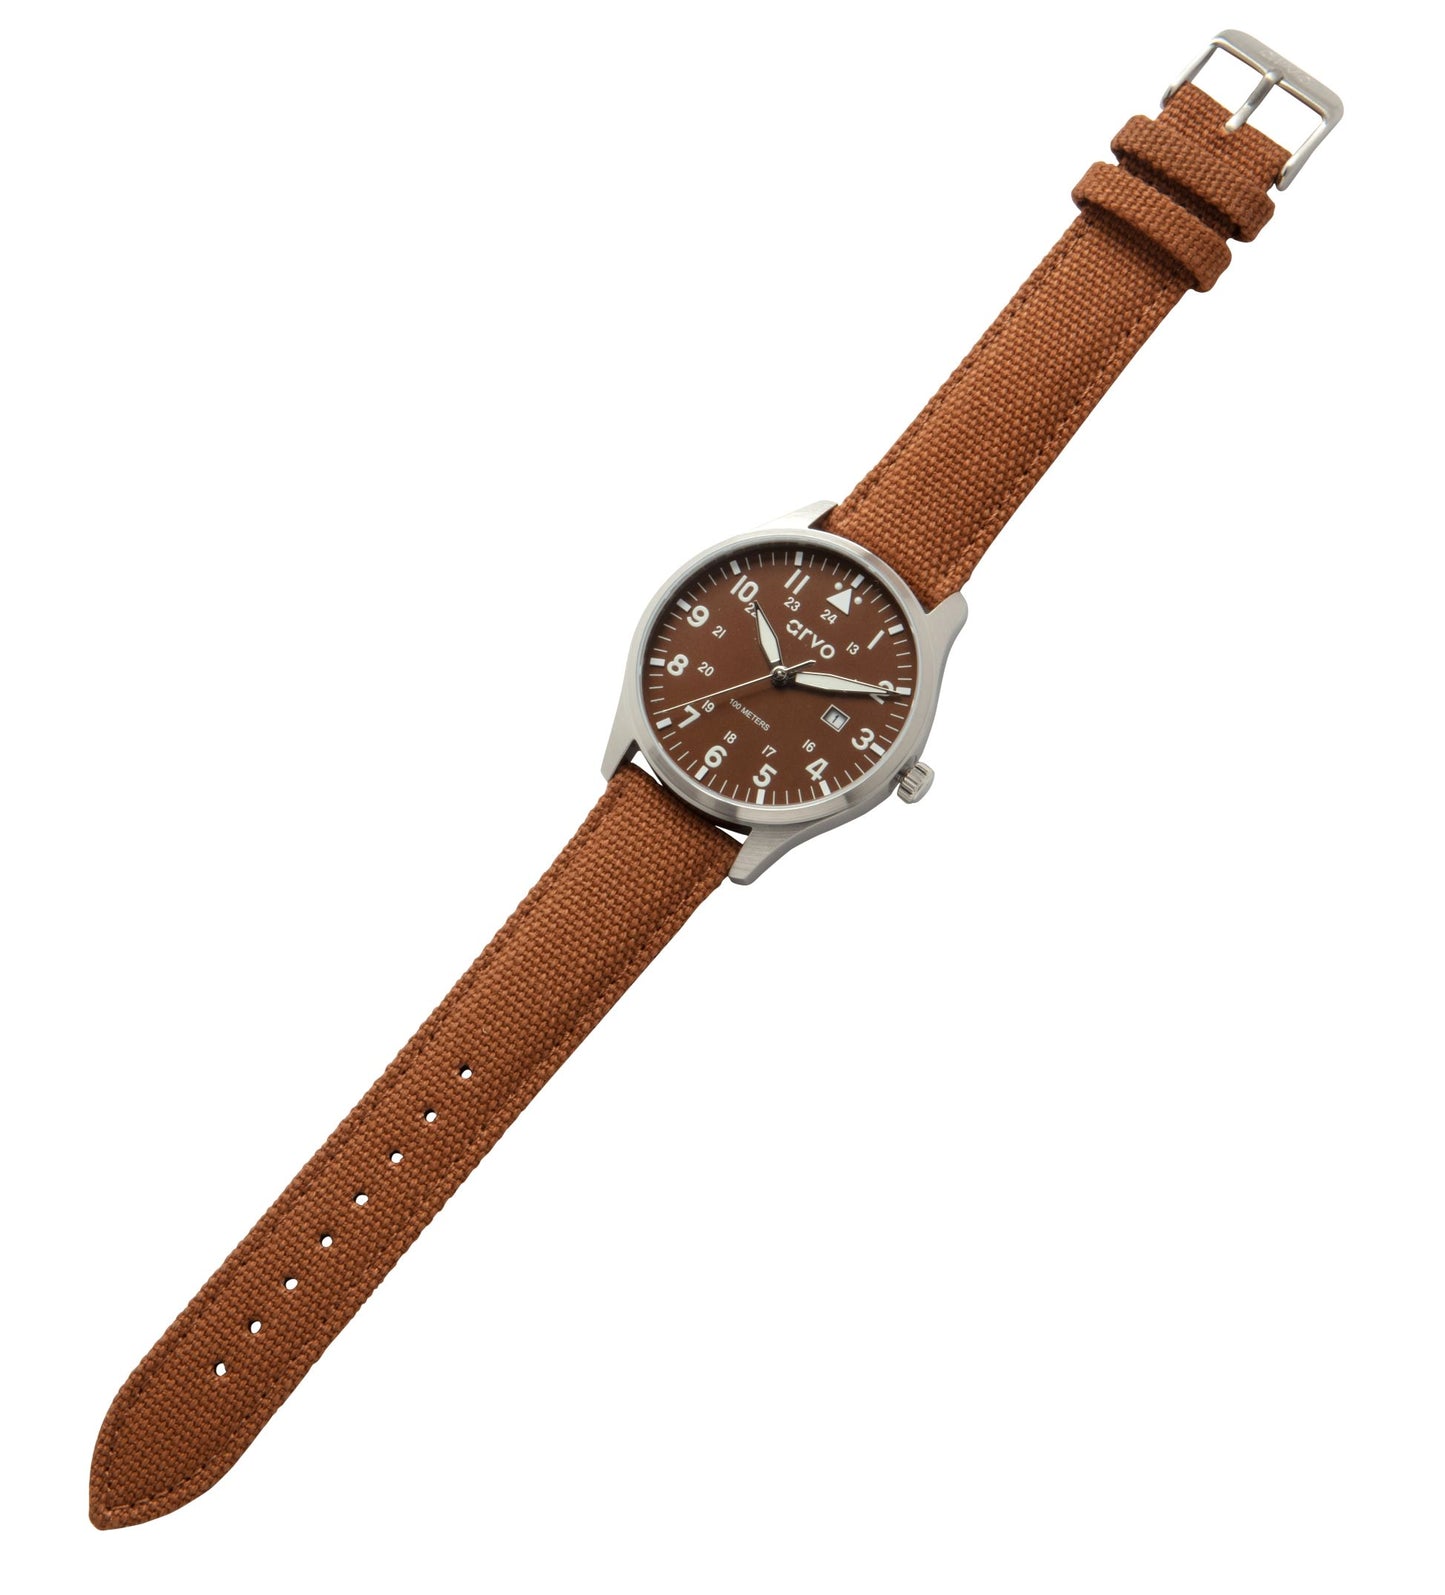 Arvo Rove Field Watch for men with a buckeye brown dial and brown canvas strap laying flat